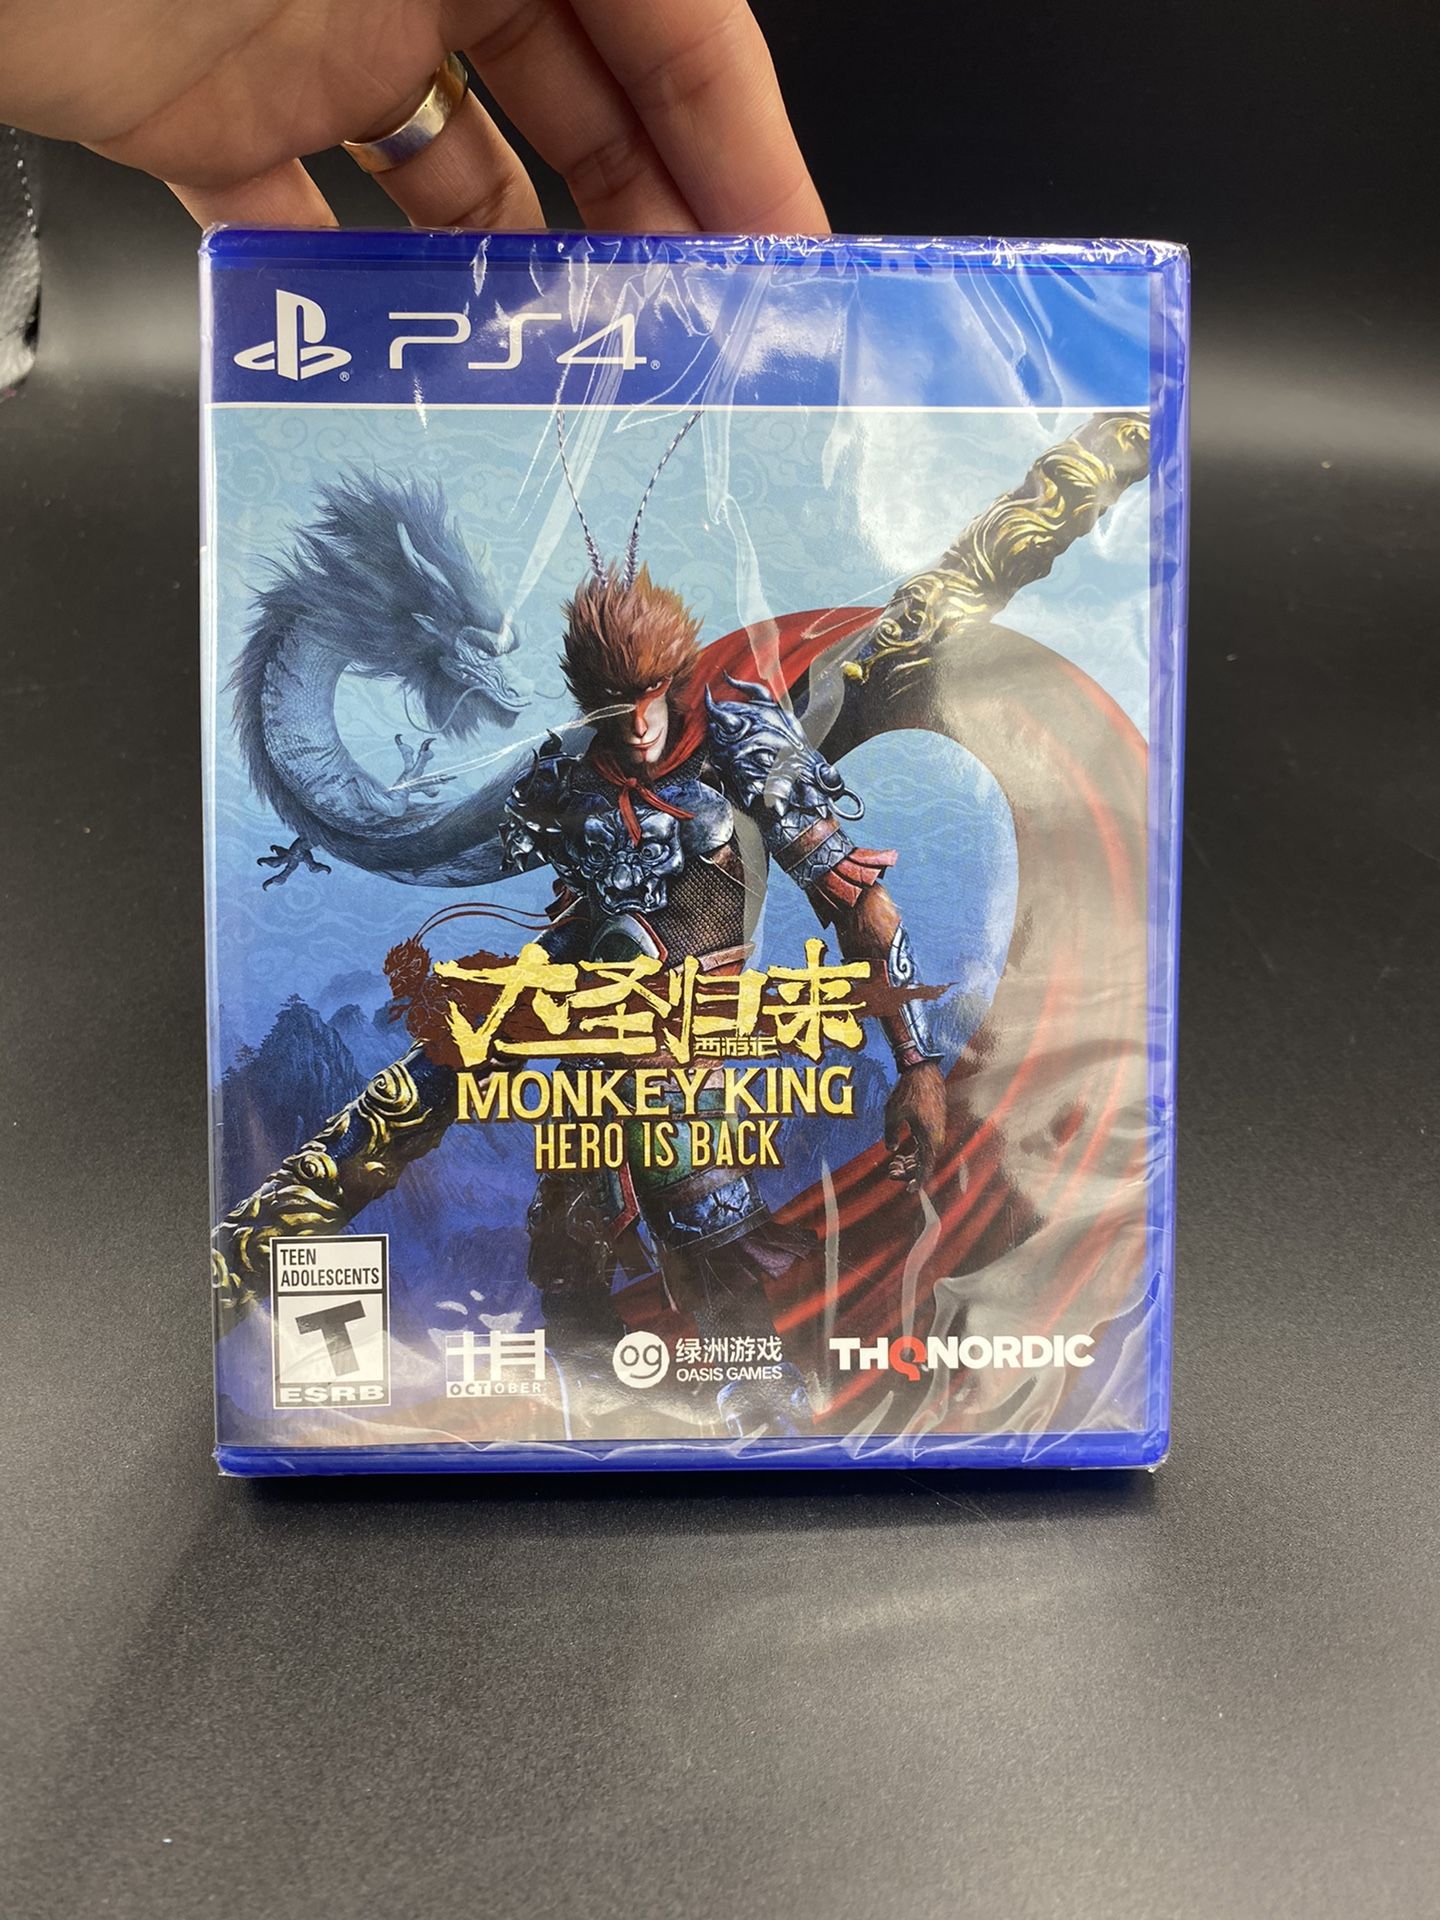 Monkey King Hero Is Back: Playstation 4 [Brand New] PS4 Sealed